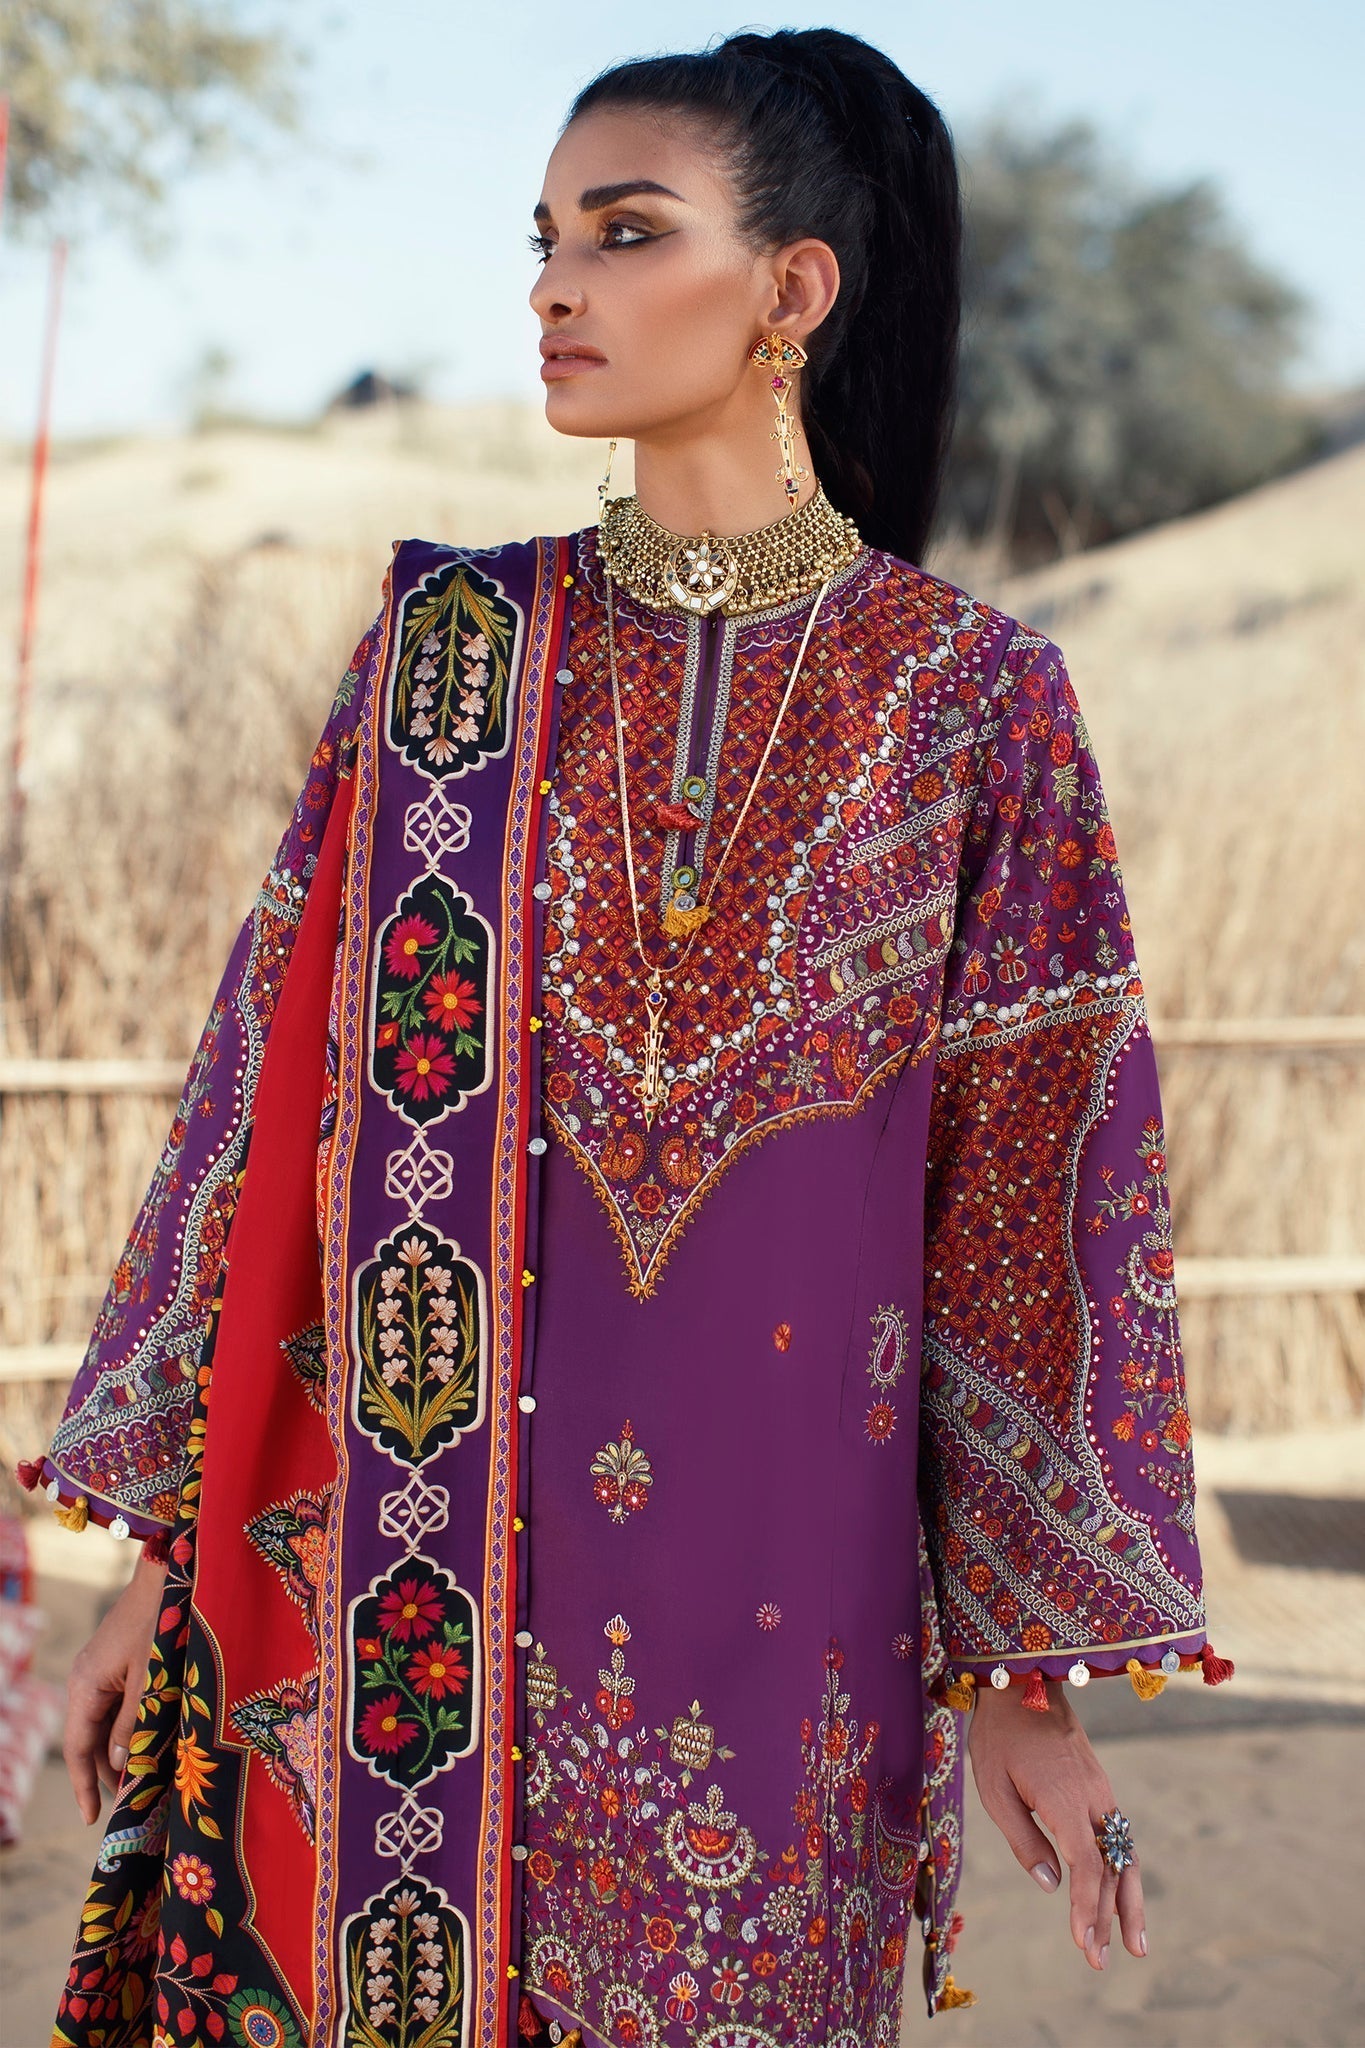 Deep Falsa Tribal Embroidered Unstitched Suit For Women